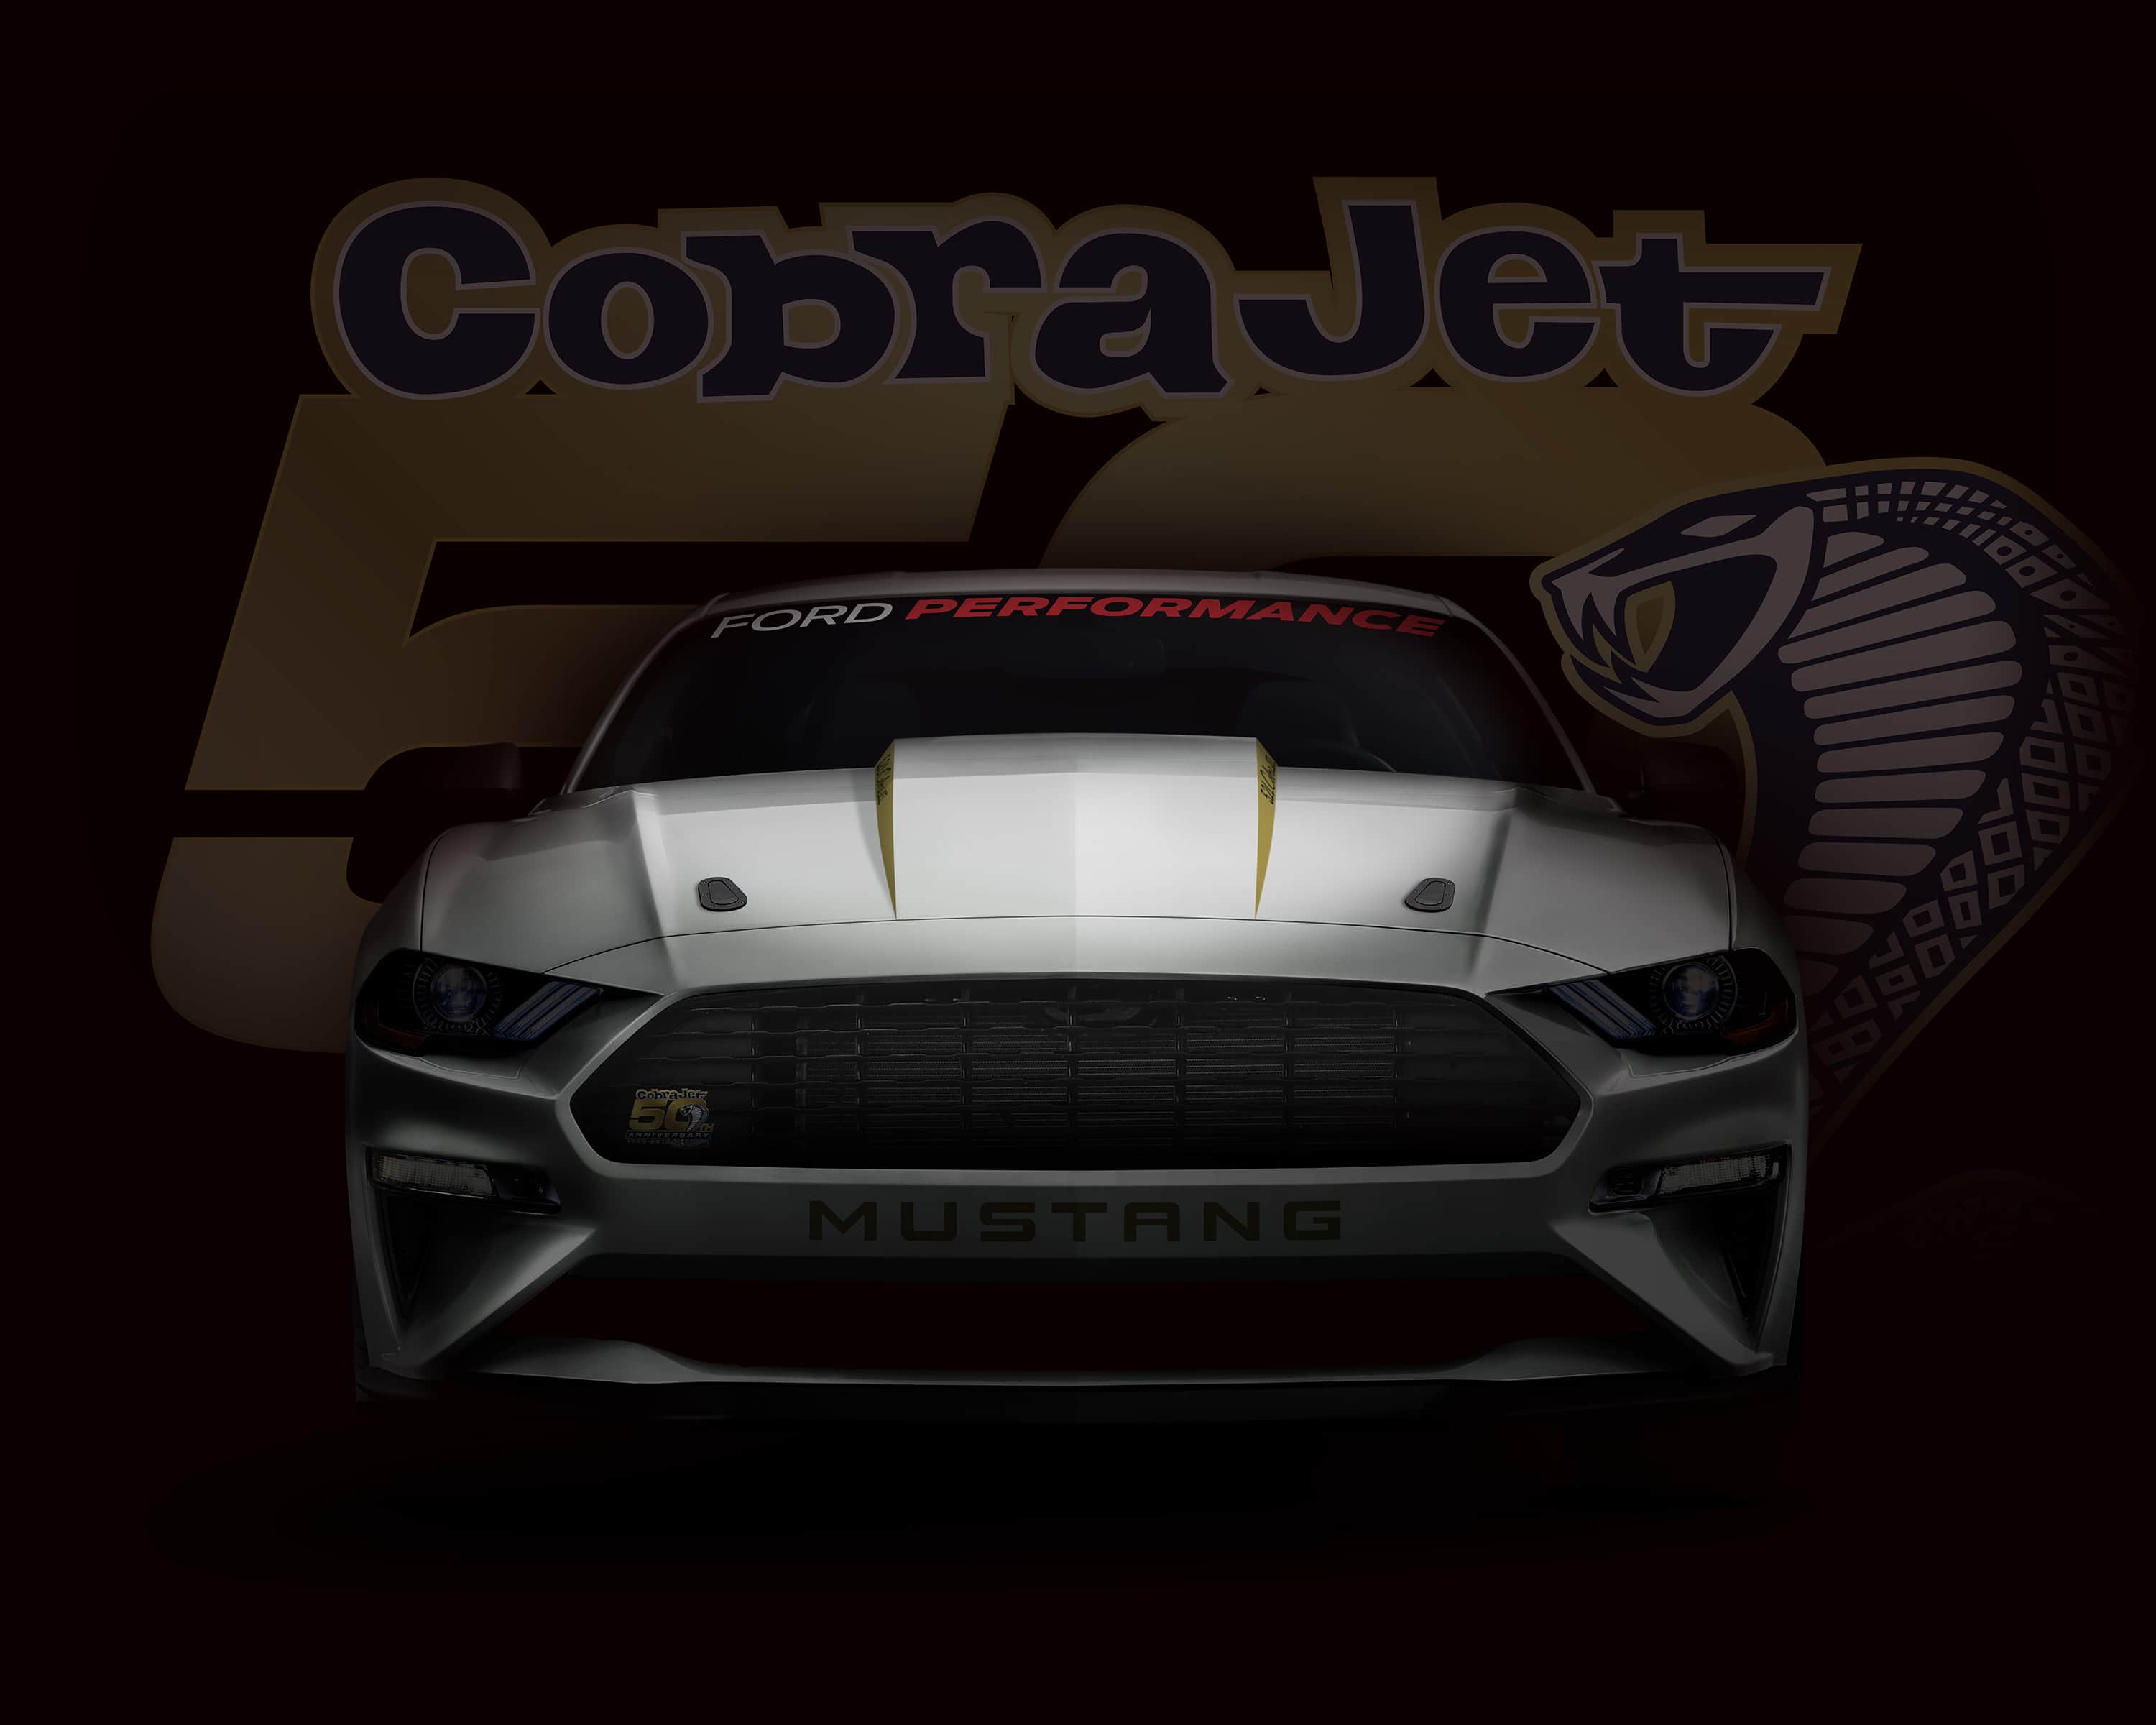 This artist's rendering teased the 2018 Ford Mustang Cobra Jet. | Ford Motor Company photo